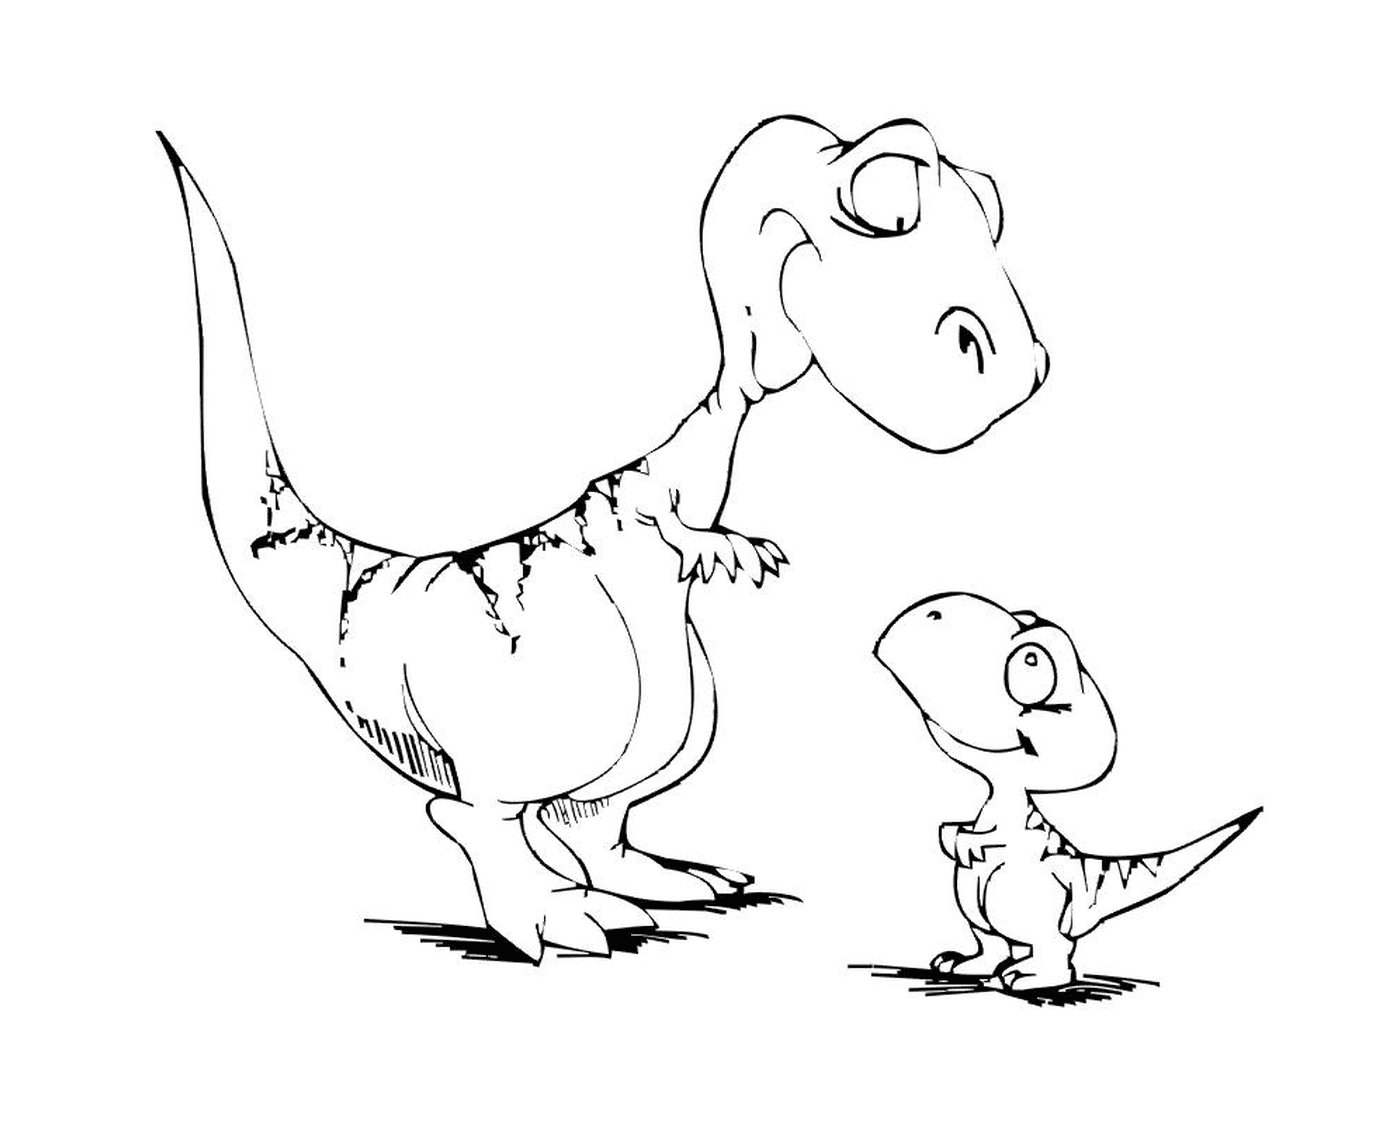  Two dinosaurs 